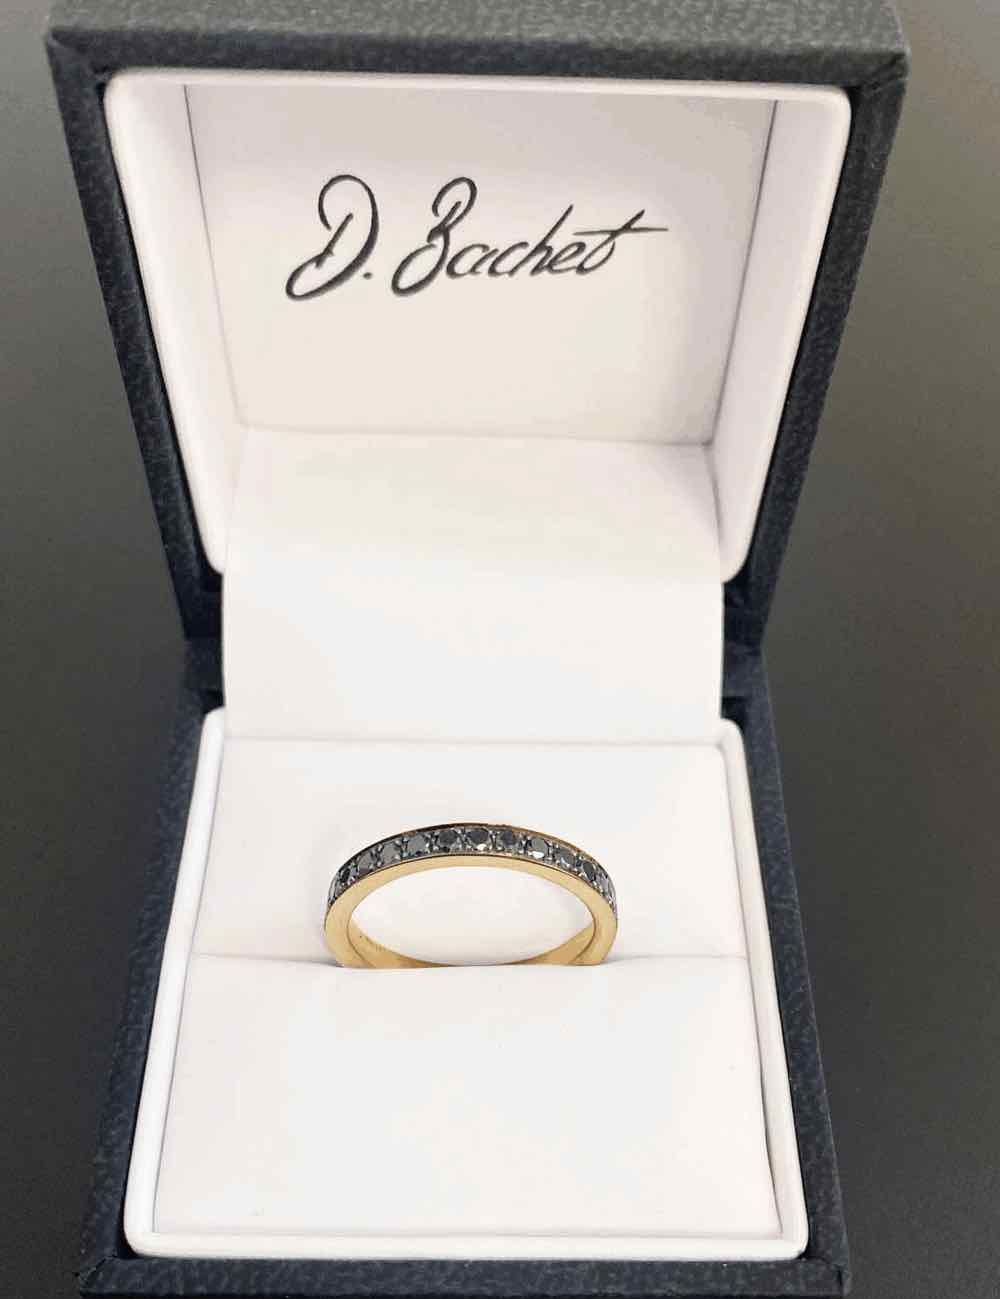 Dare to be unique and go for this unique wedding ring for women and men in yellow gold and black diamonds